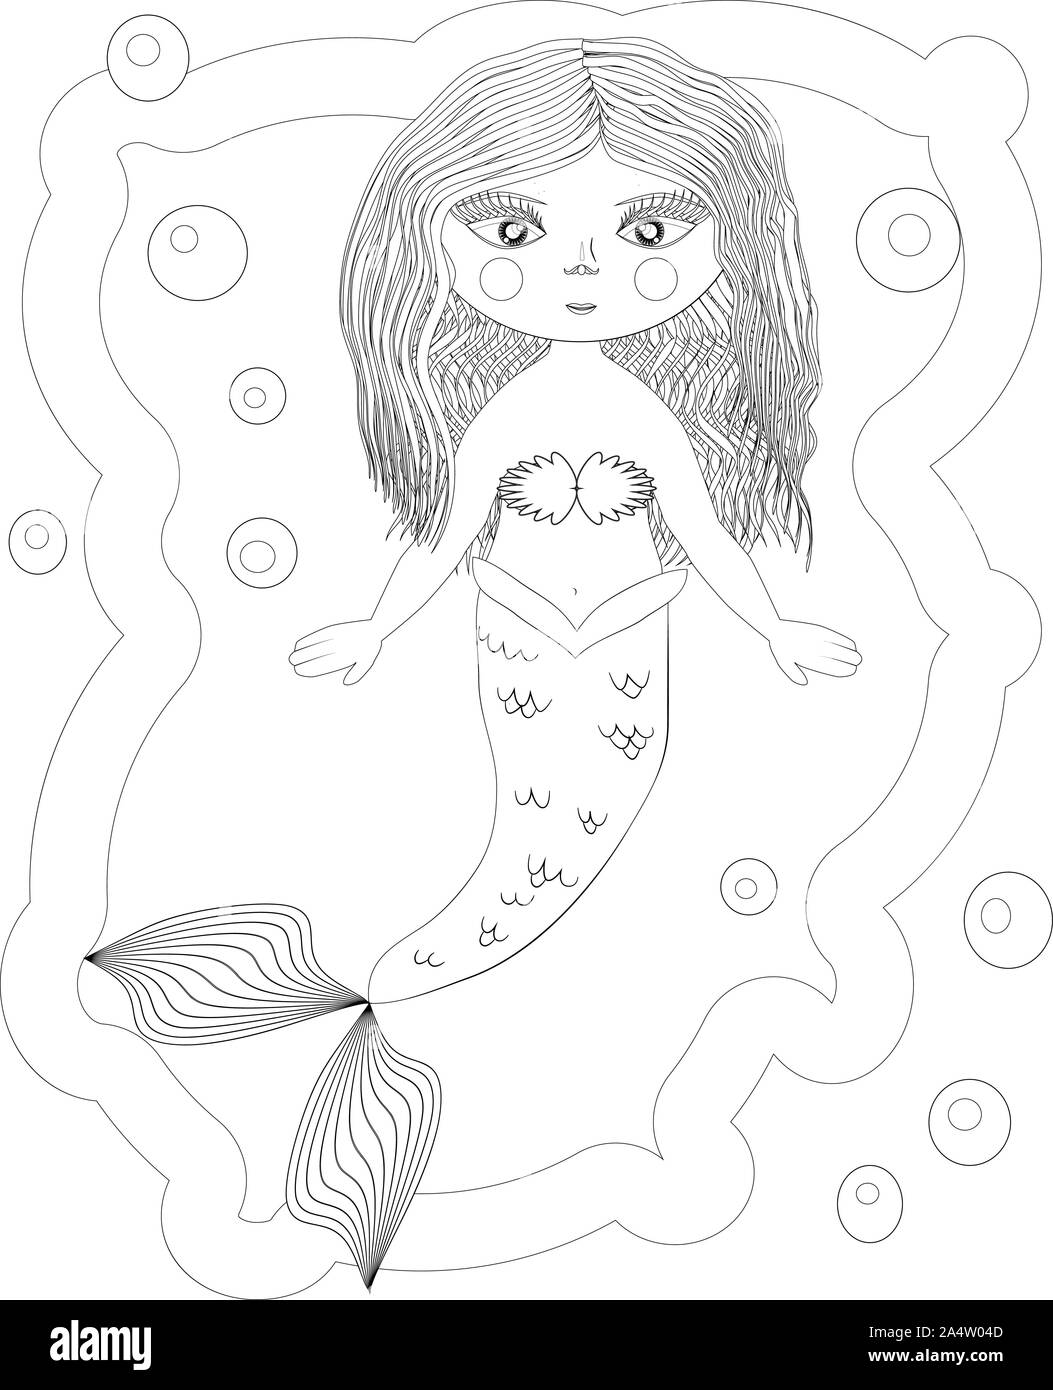 Beautiful Mermaid Underwater World Anti Stress Coloring Book For Adult Outline Drawing Coloring Page Black And White In Zentangle Style Sea Shel Stock Photo Alamy